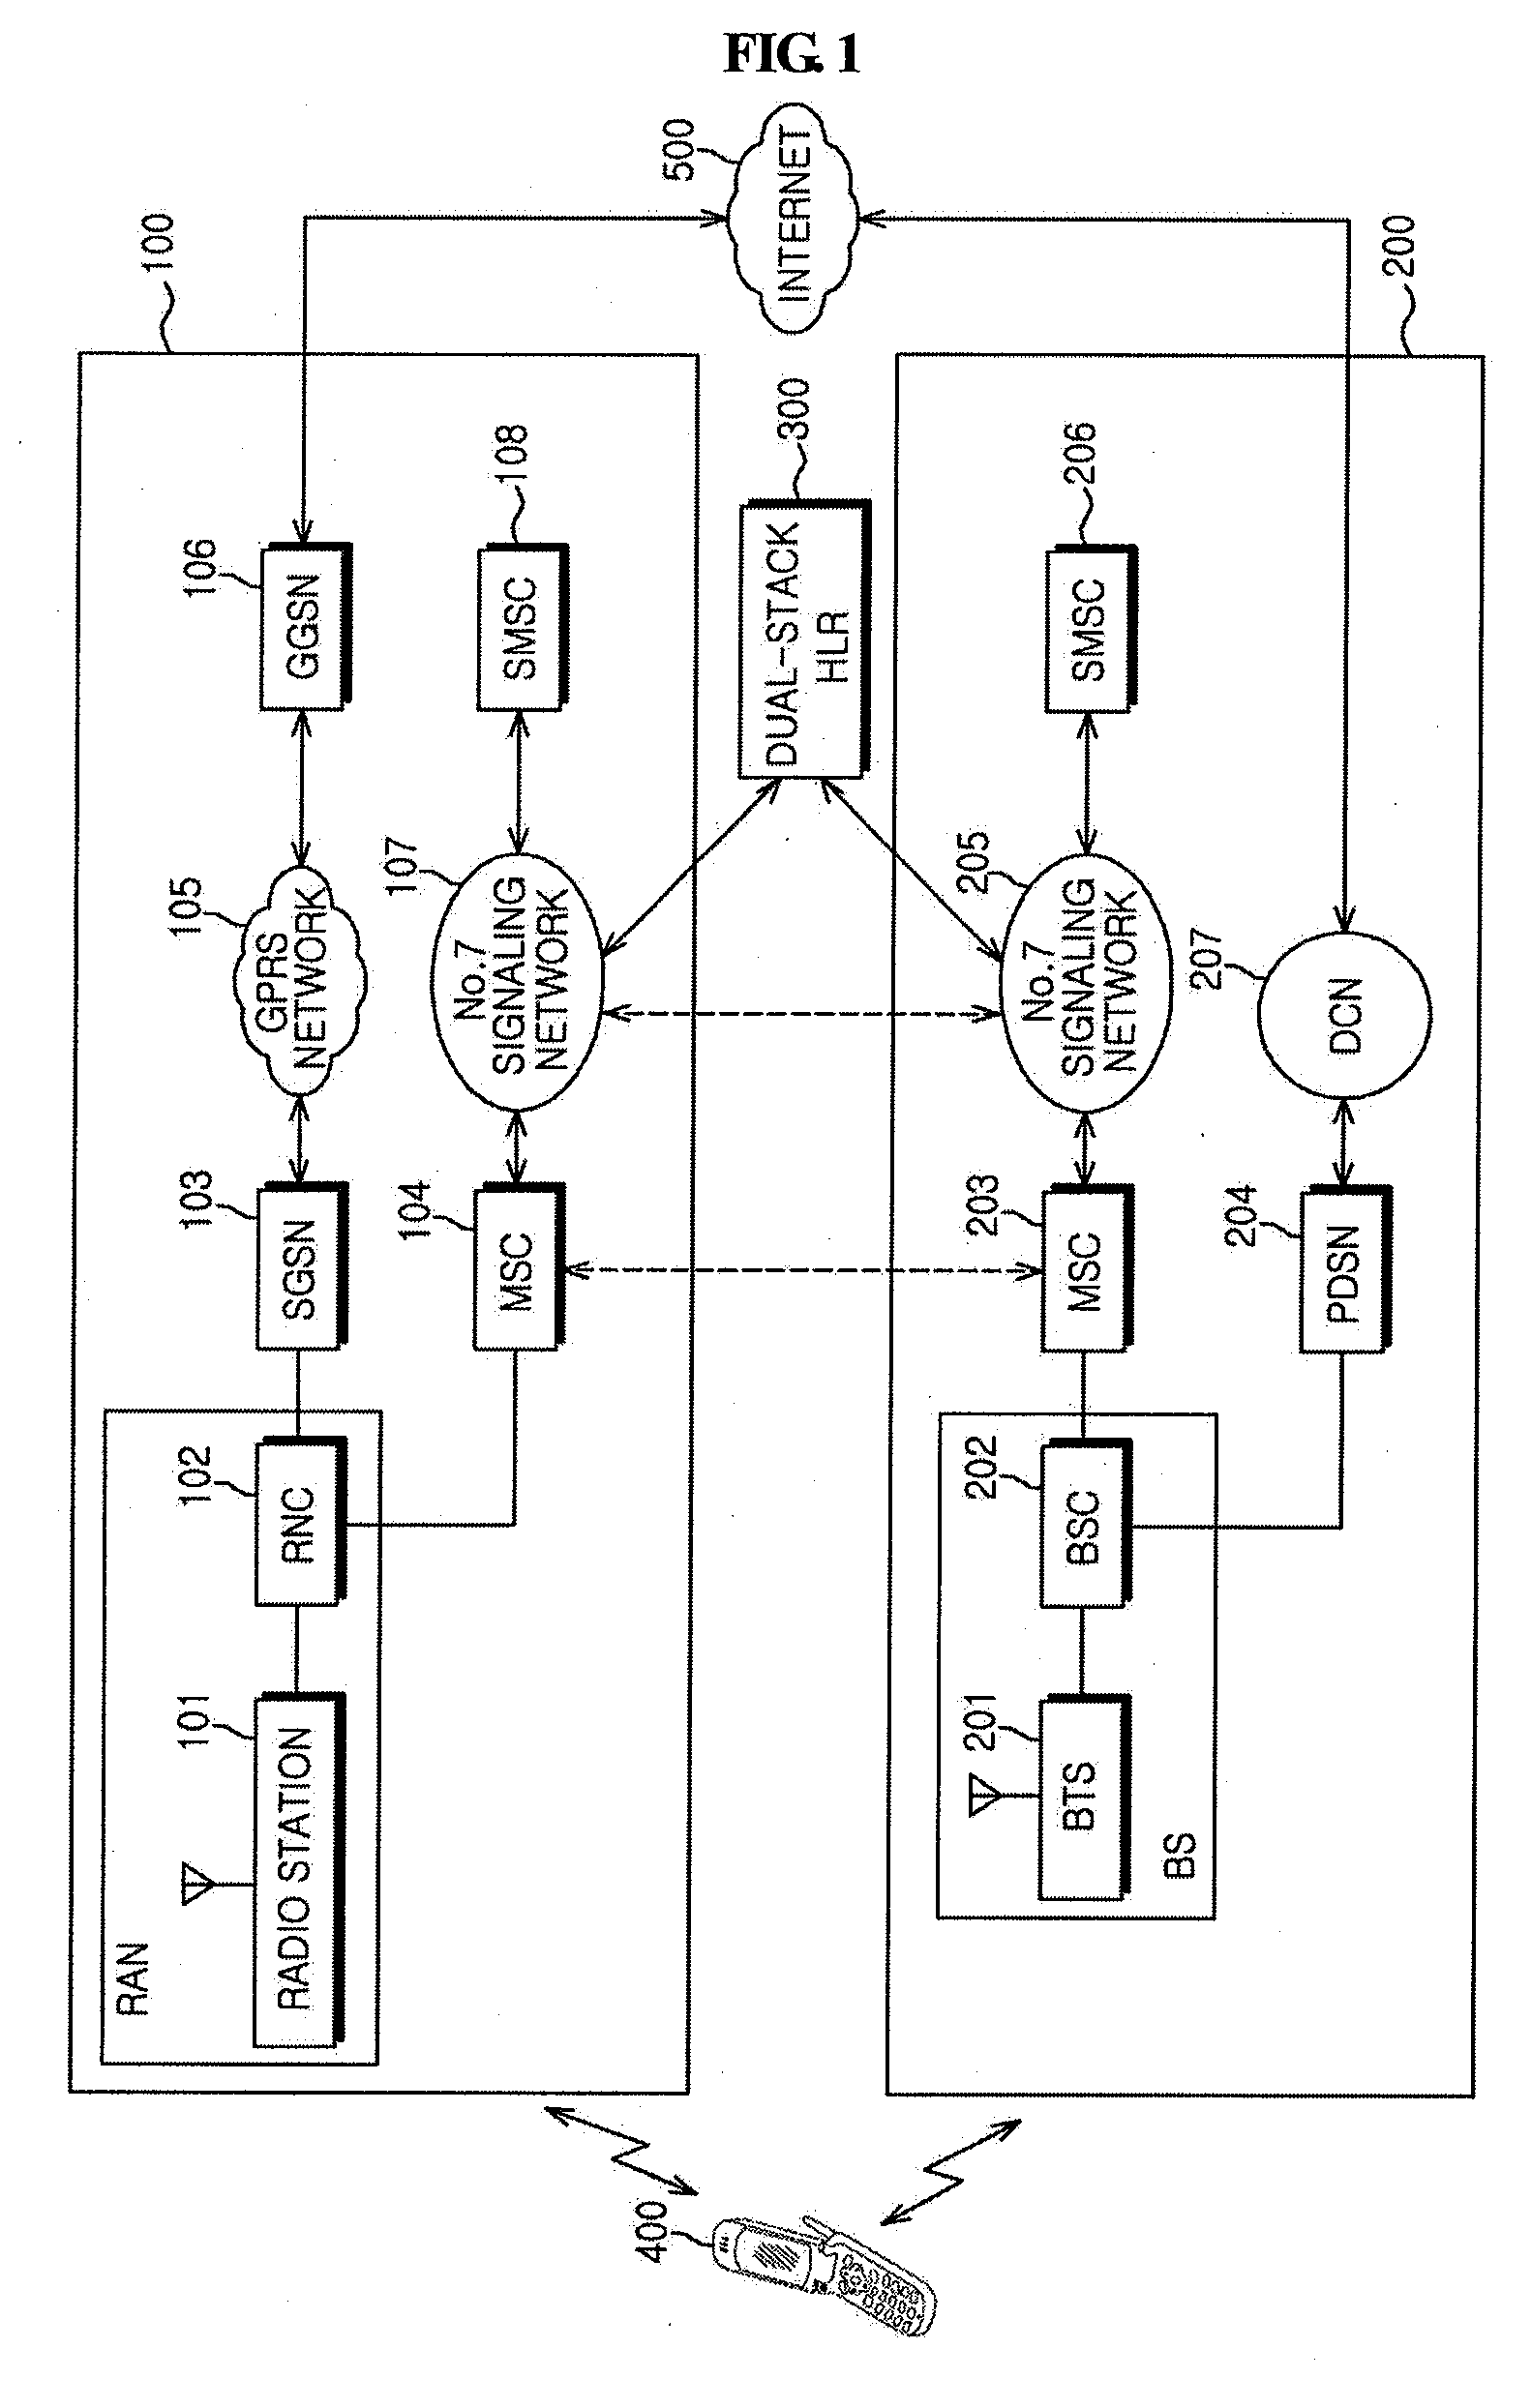 Hand Over Method From Asynchronous Mobile Communication Network to Synchronous Mobile Communication Network